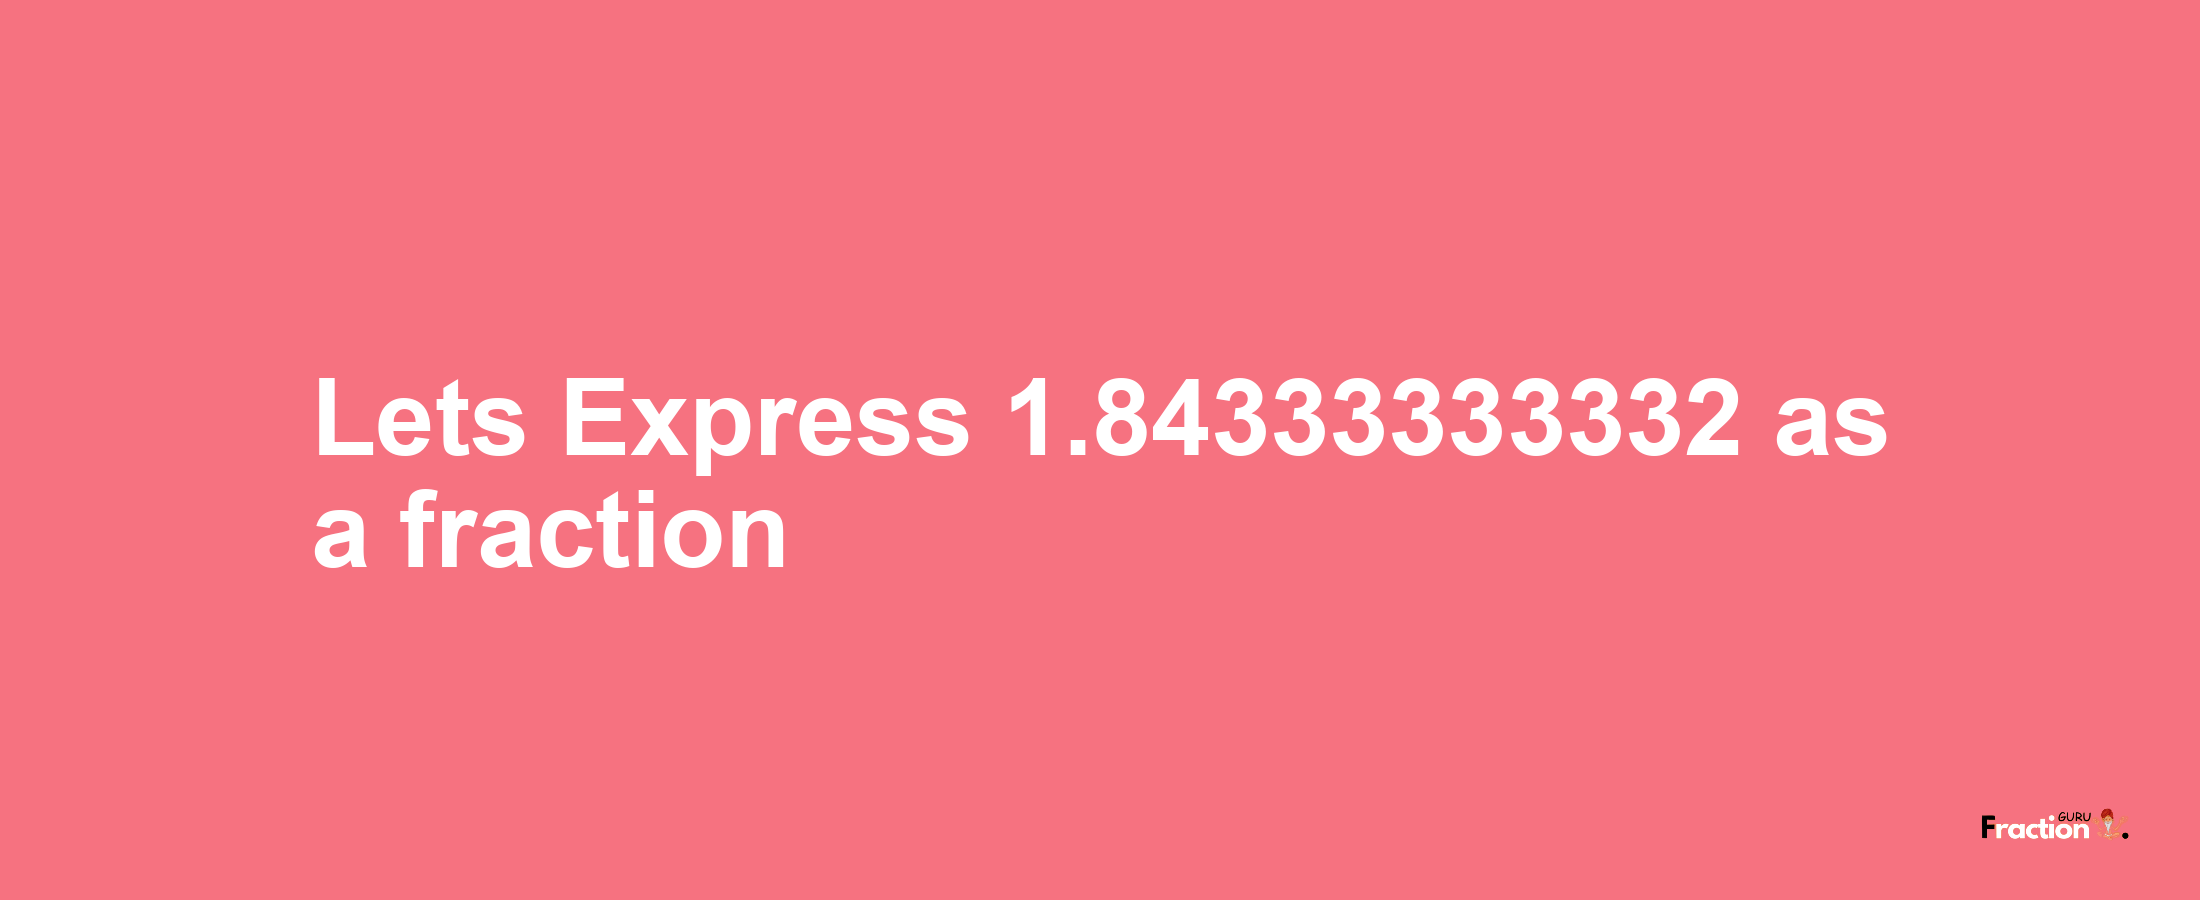 Lets Express 1.84333333332 as afraction